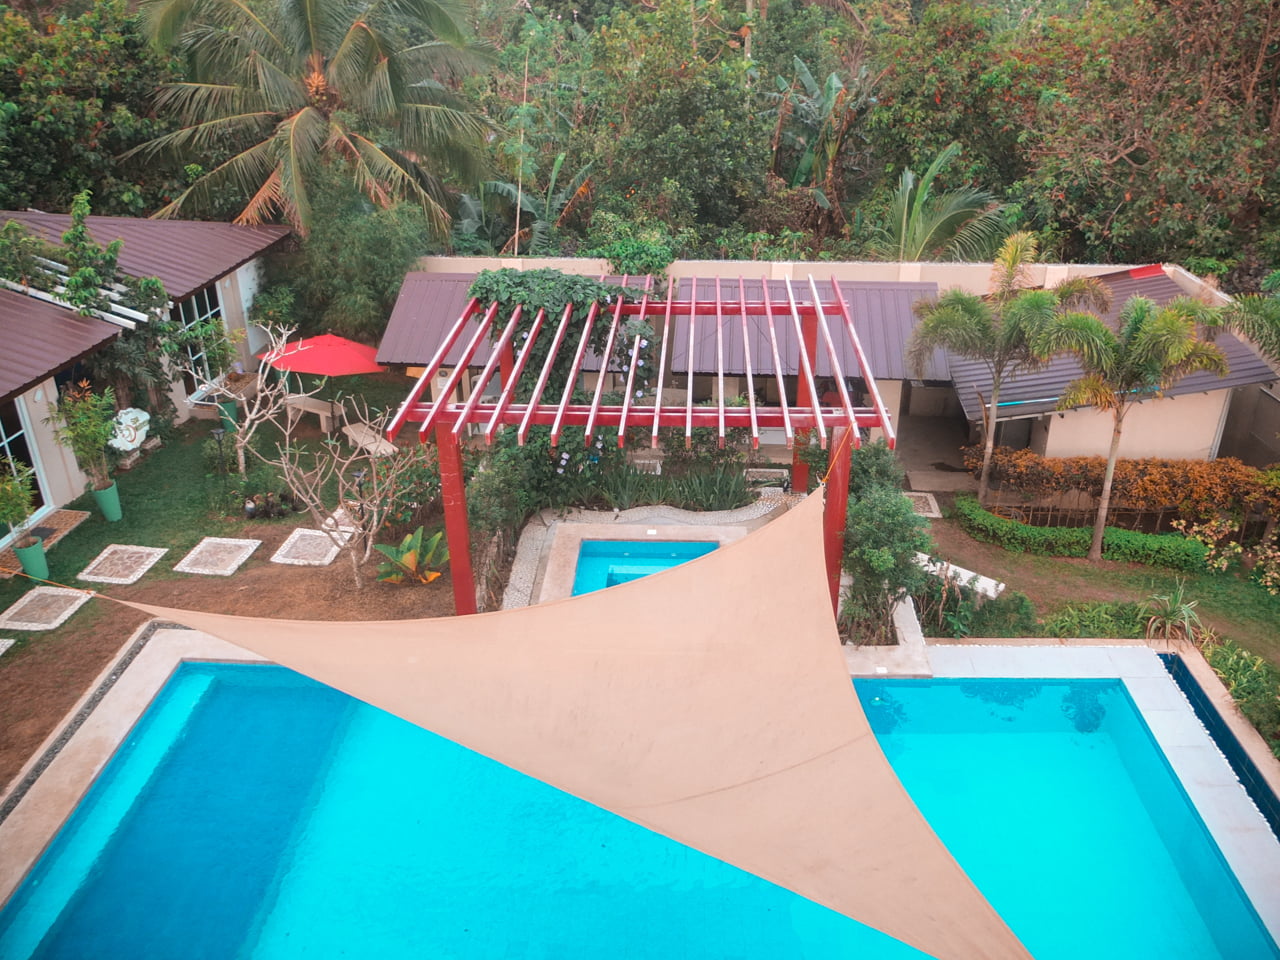 The Coffee Estate: Instagramable Resort [Vacation House] in Amadeo, Cavite